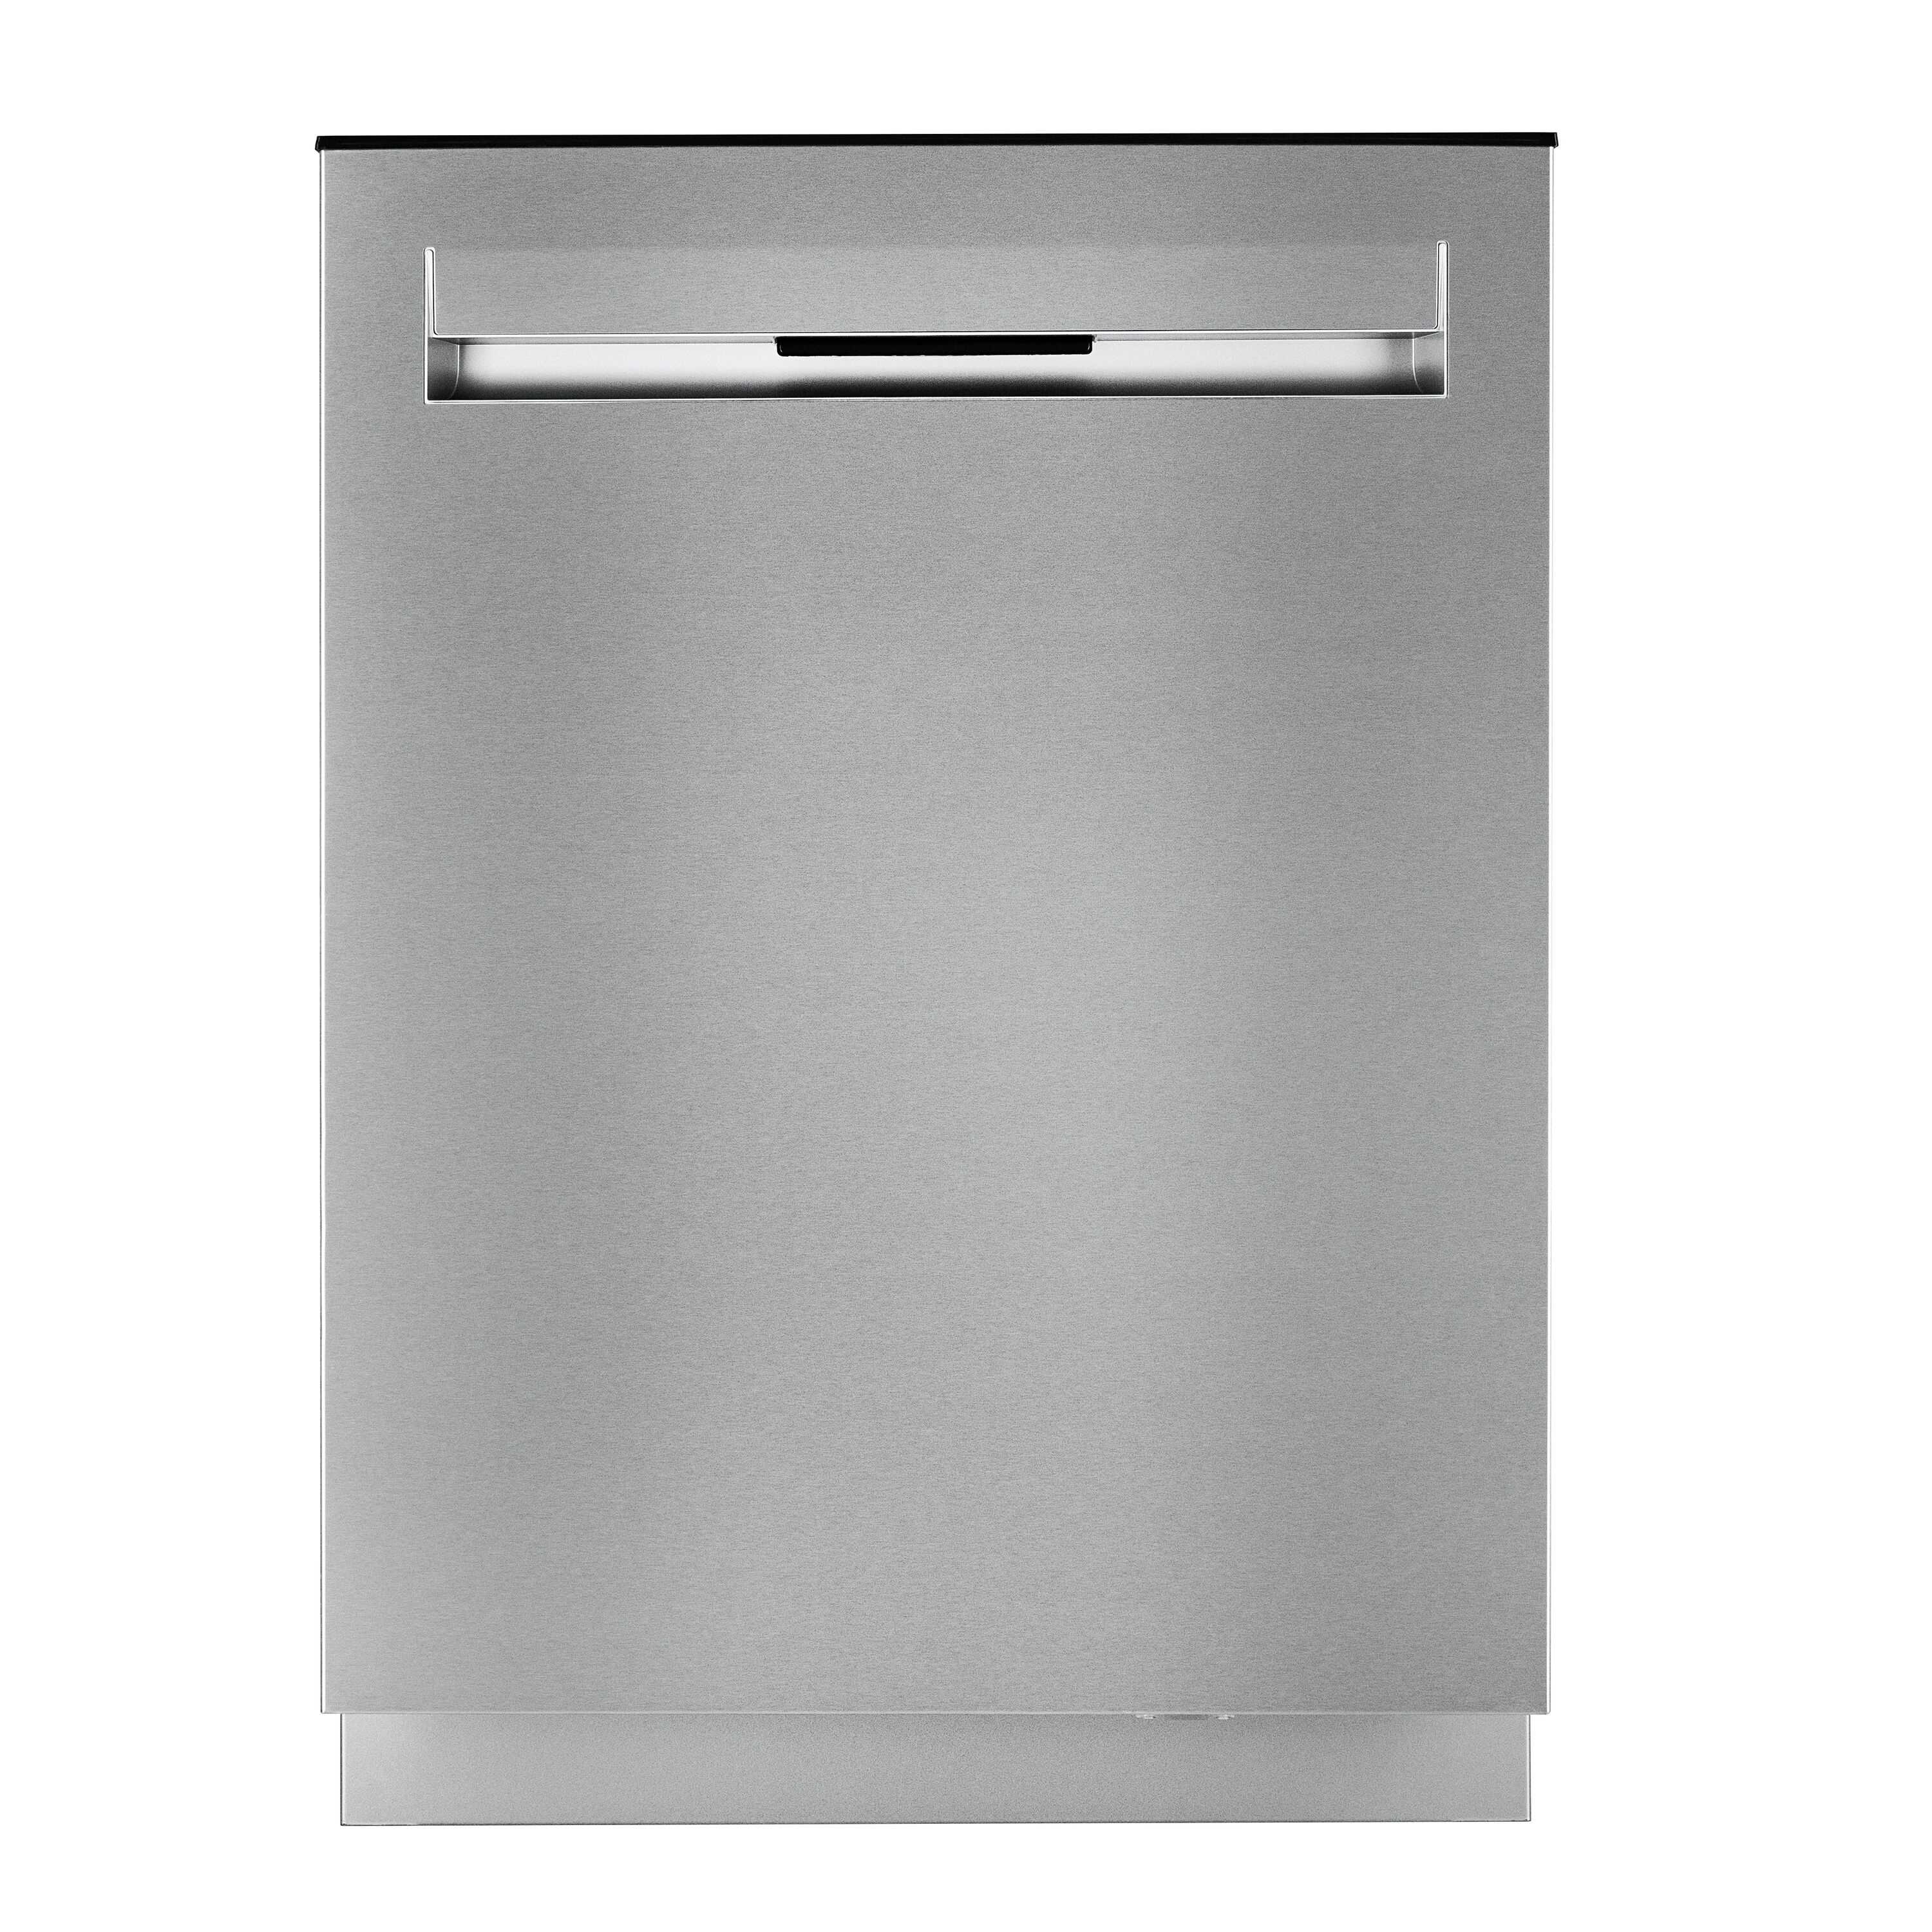 Hisense Top Control 24-in Built-In Dishwasher With Third Rack ...